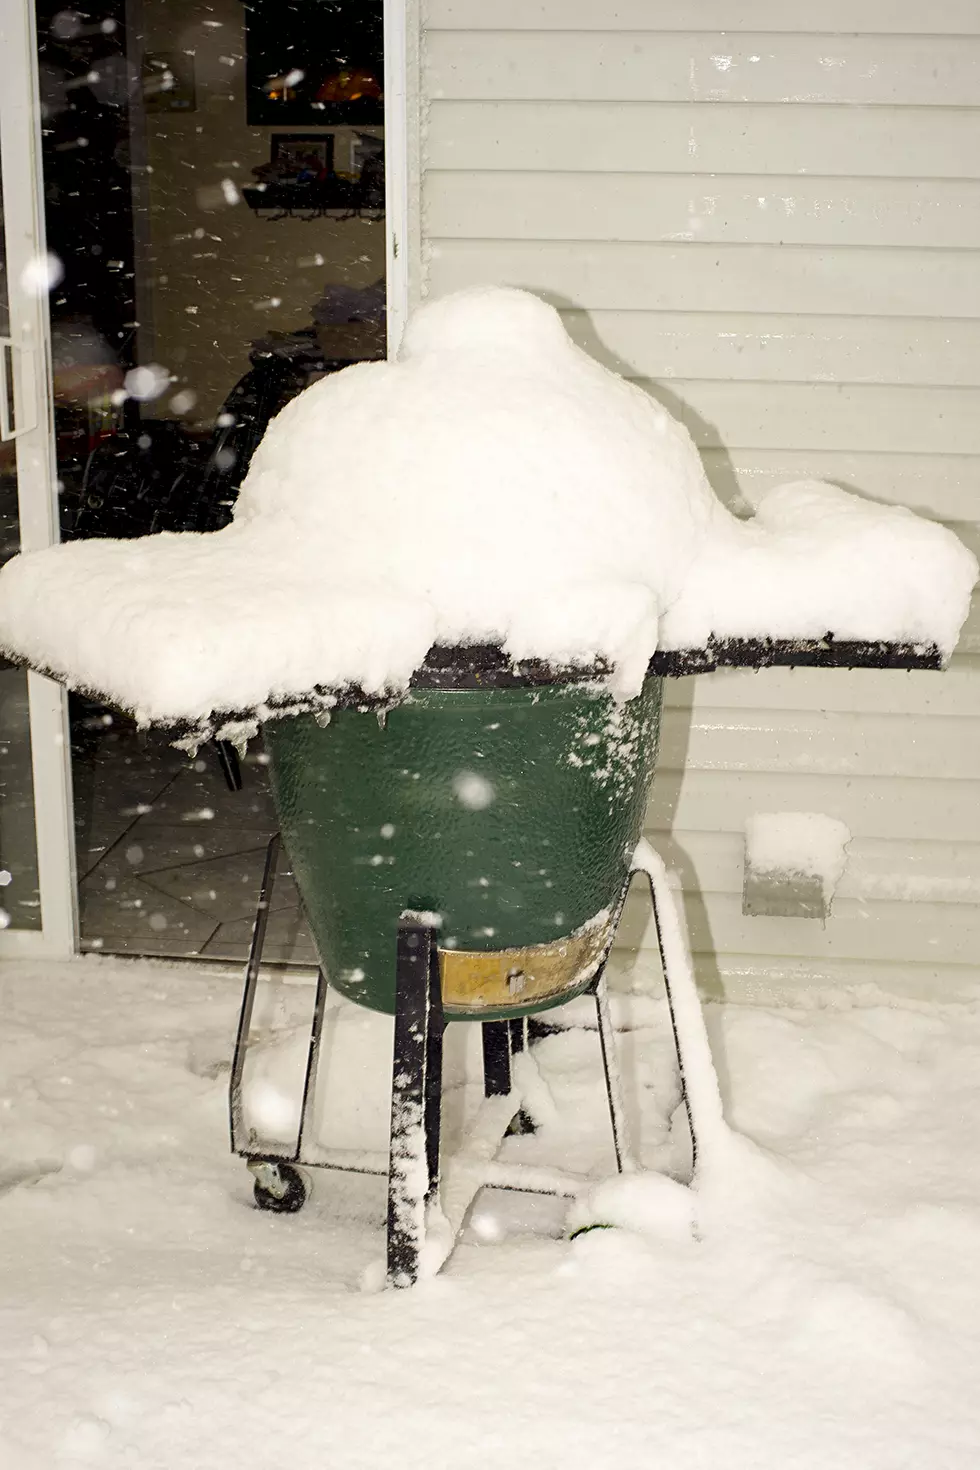 Bill Doyle&#8217;s grill represents today&#8217;s snow accumulation in Jackson